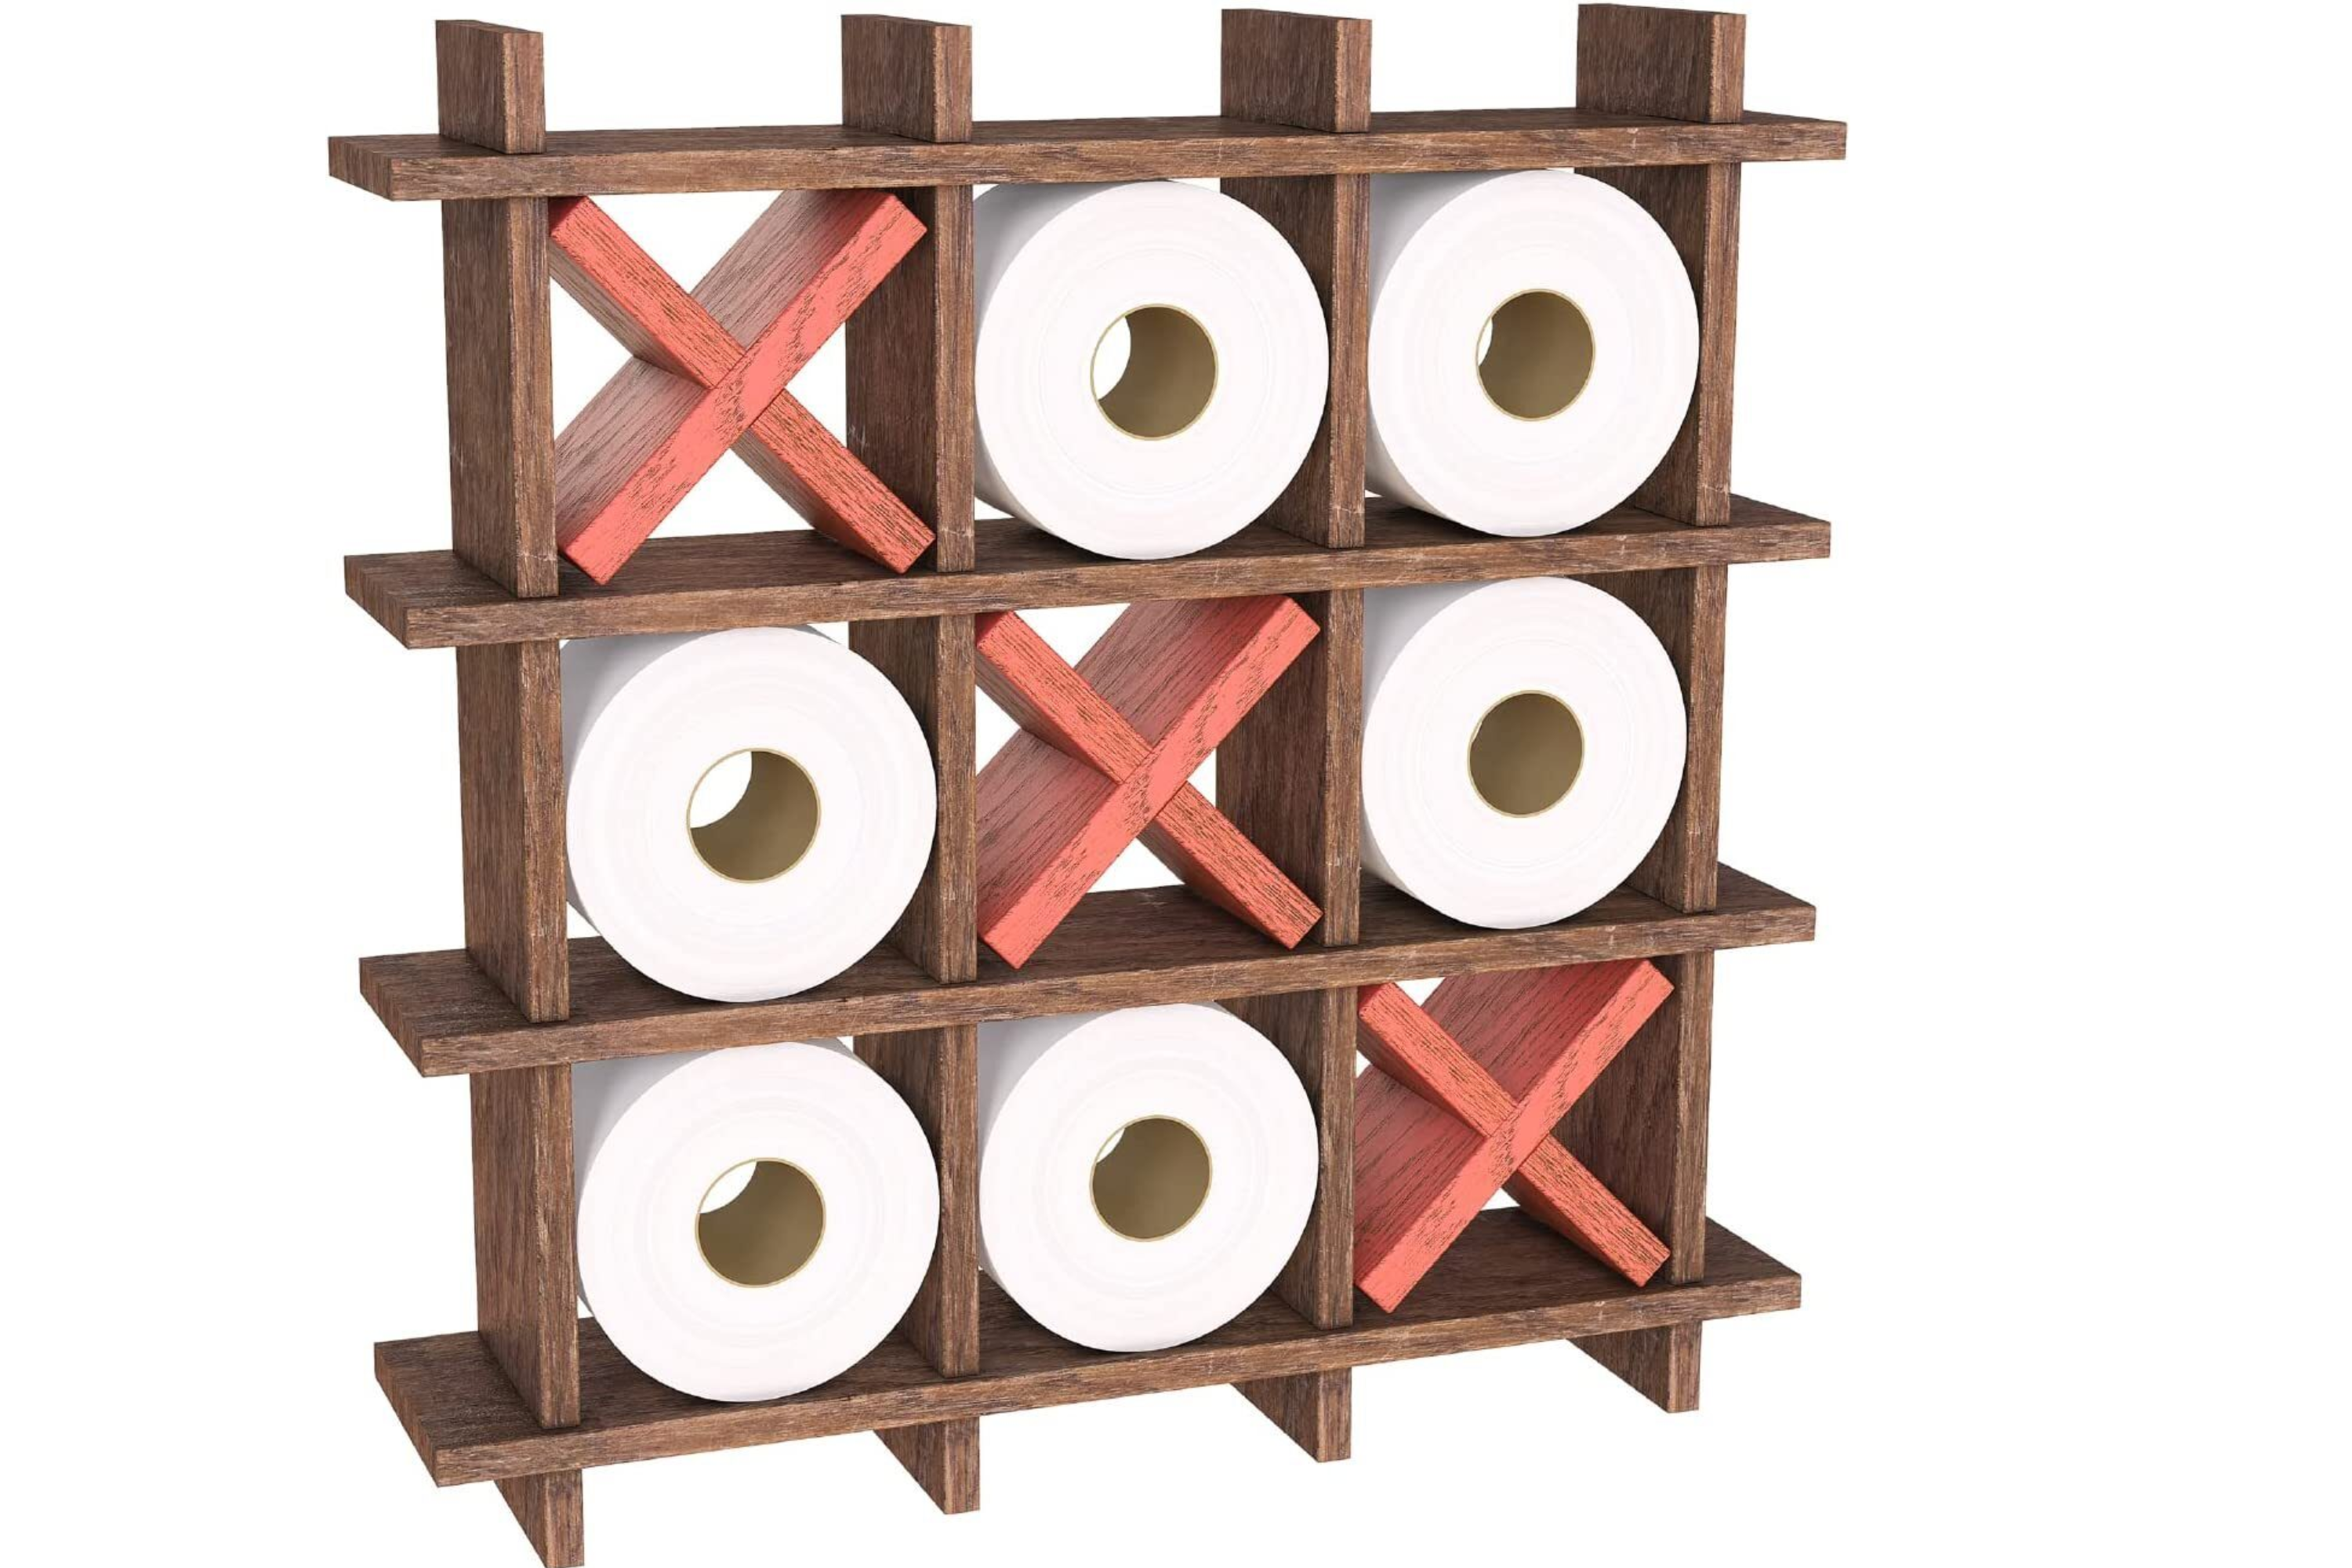 Rustic Wooden Toilet Paper Holder: Tic Tac Toe Design Tissue Roll Storage -  Excello Global Brands